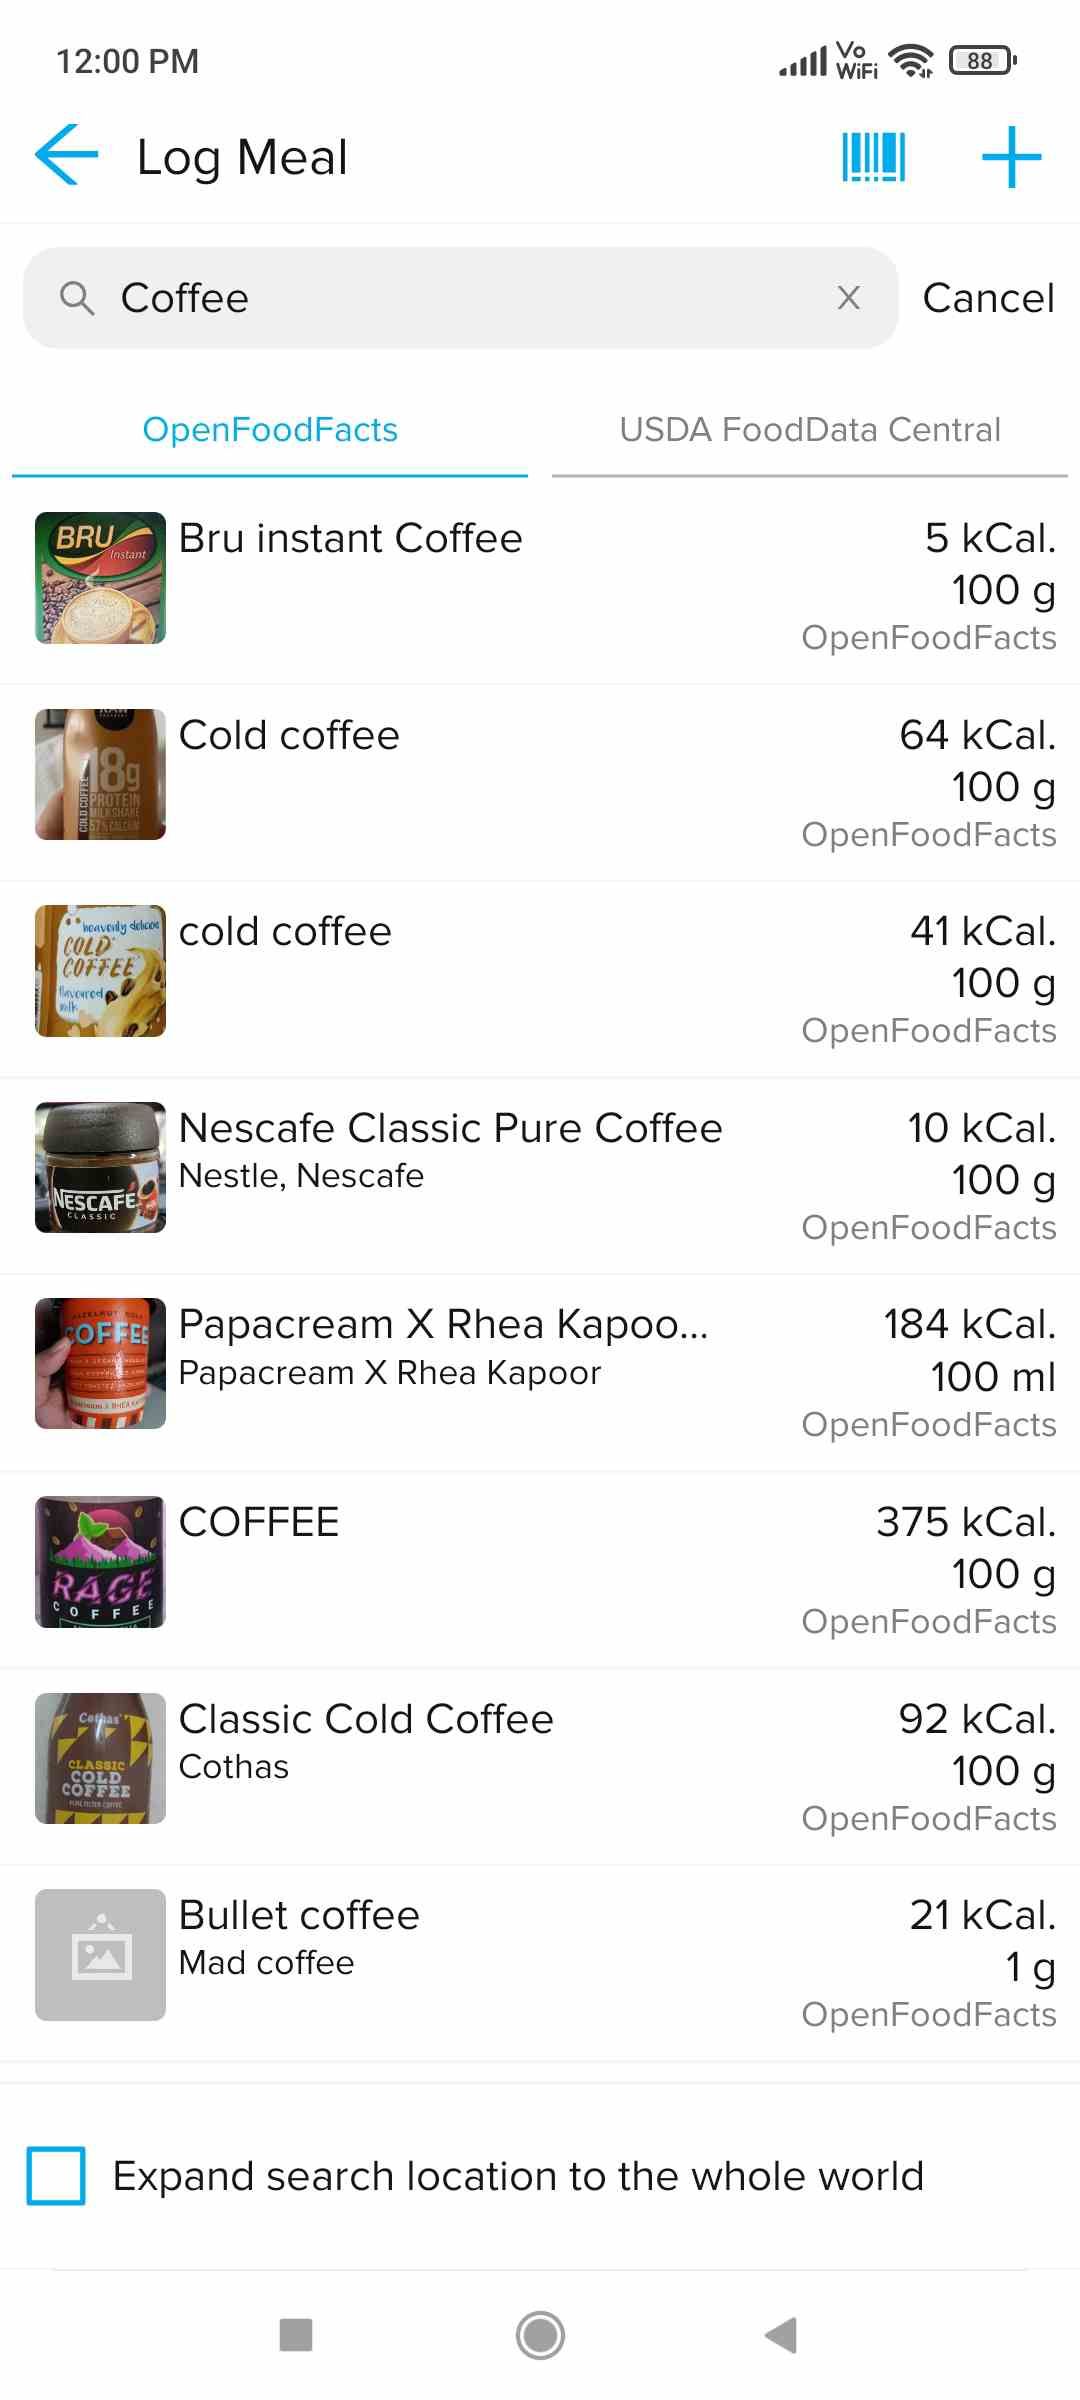 OmNom Notes lets you search the OpenFoodFacts and USFDA Food Database to add common food items quickly